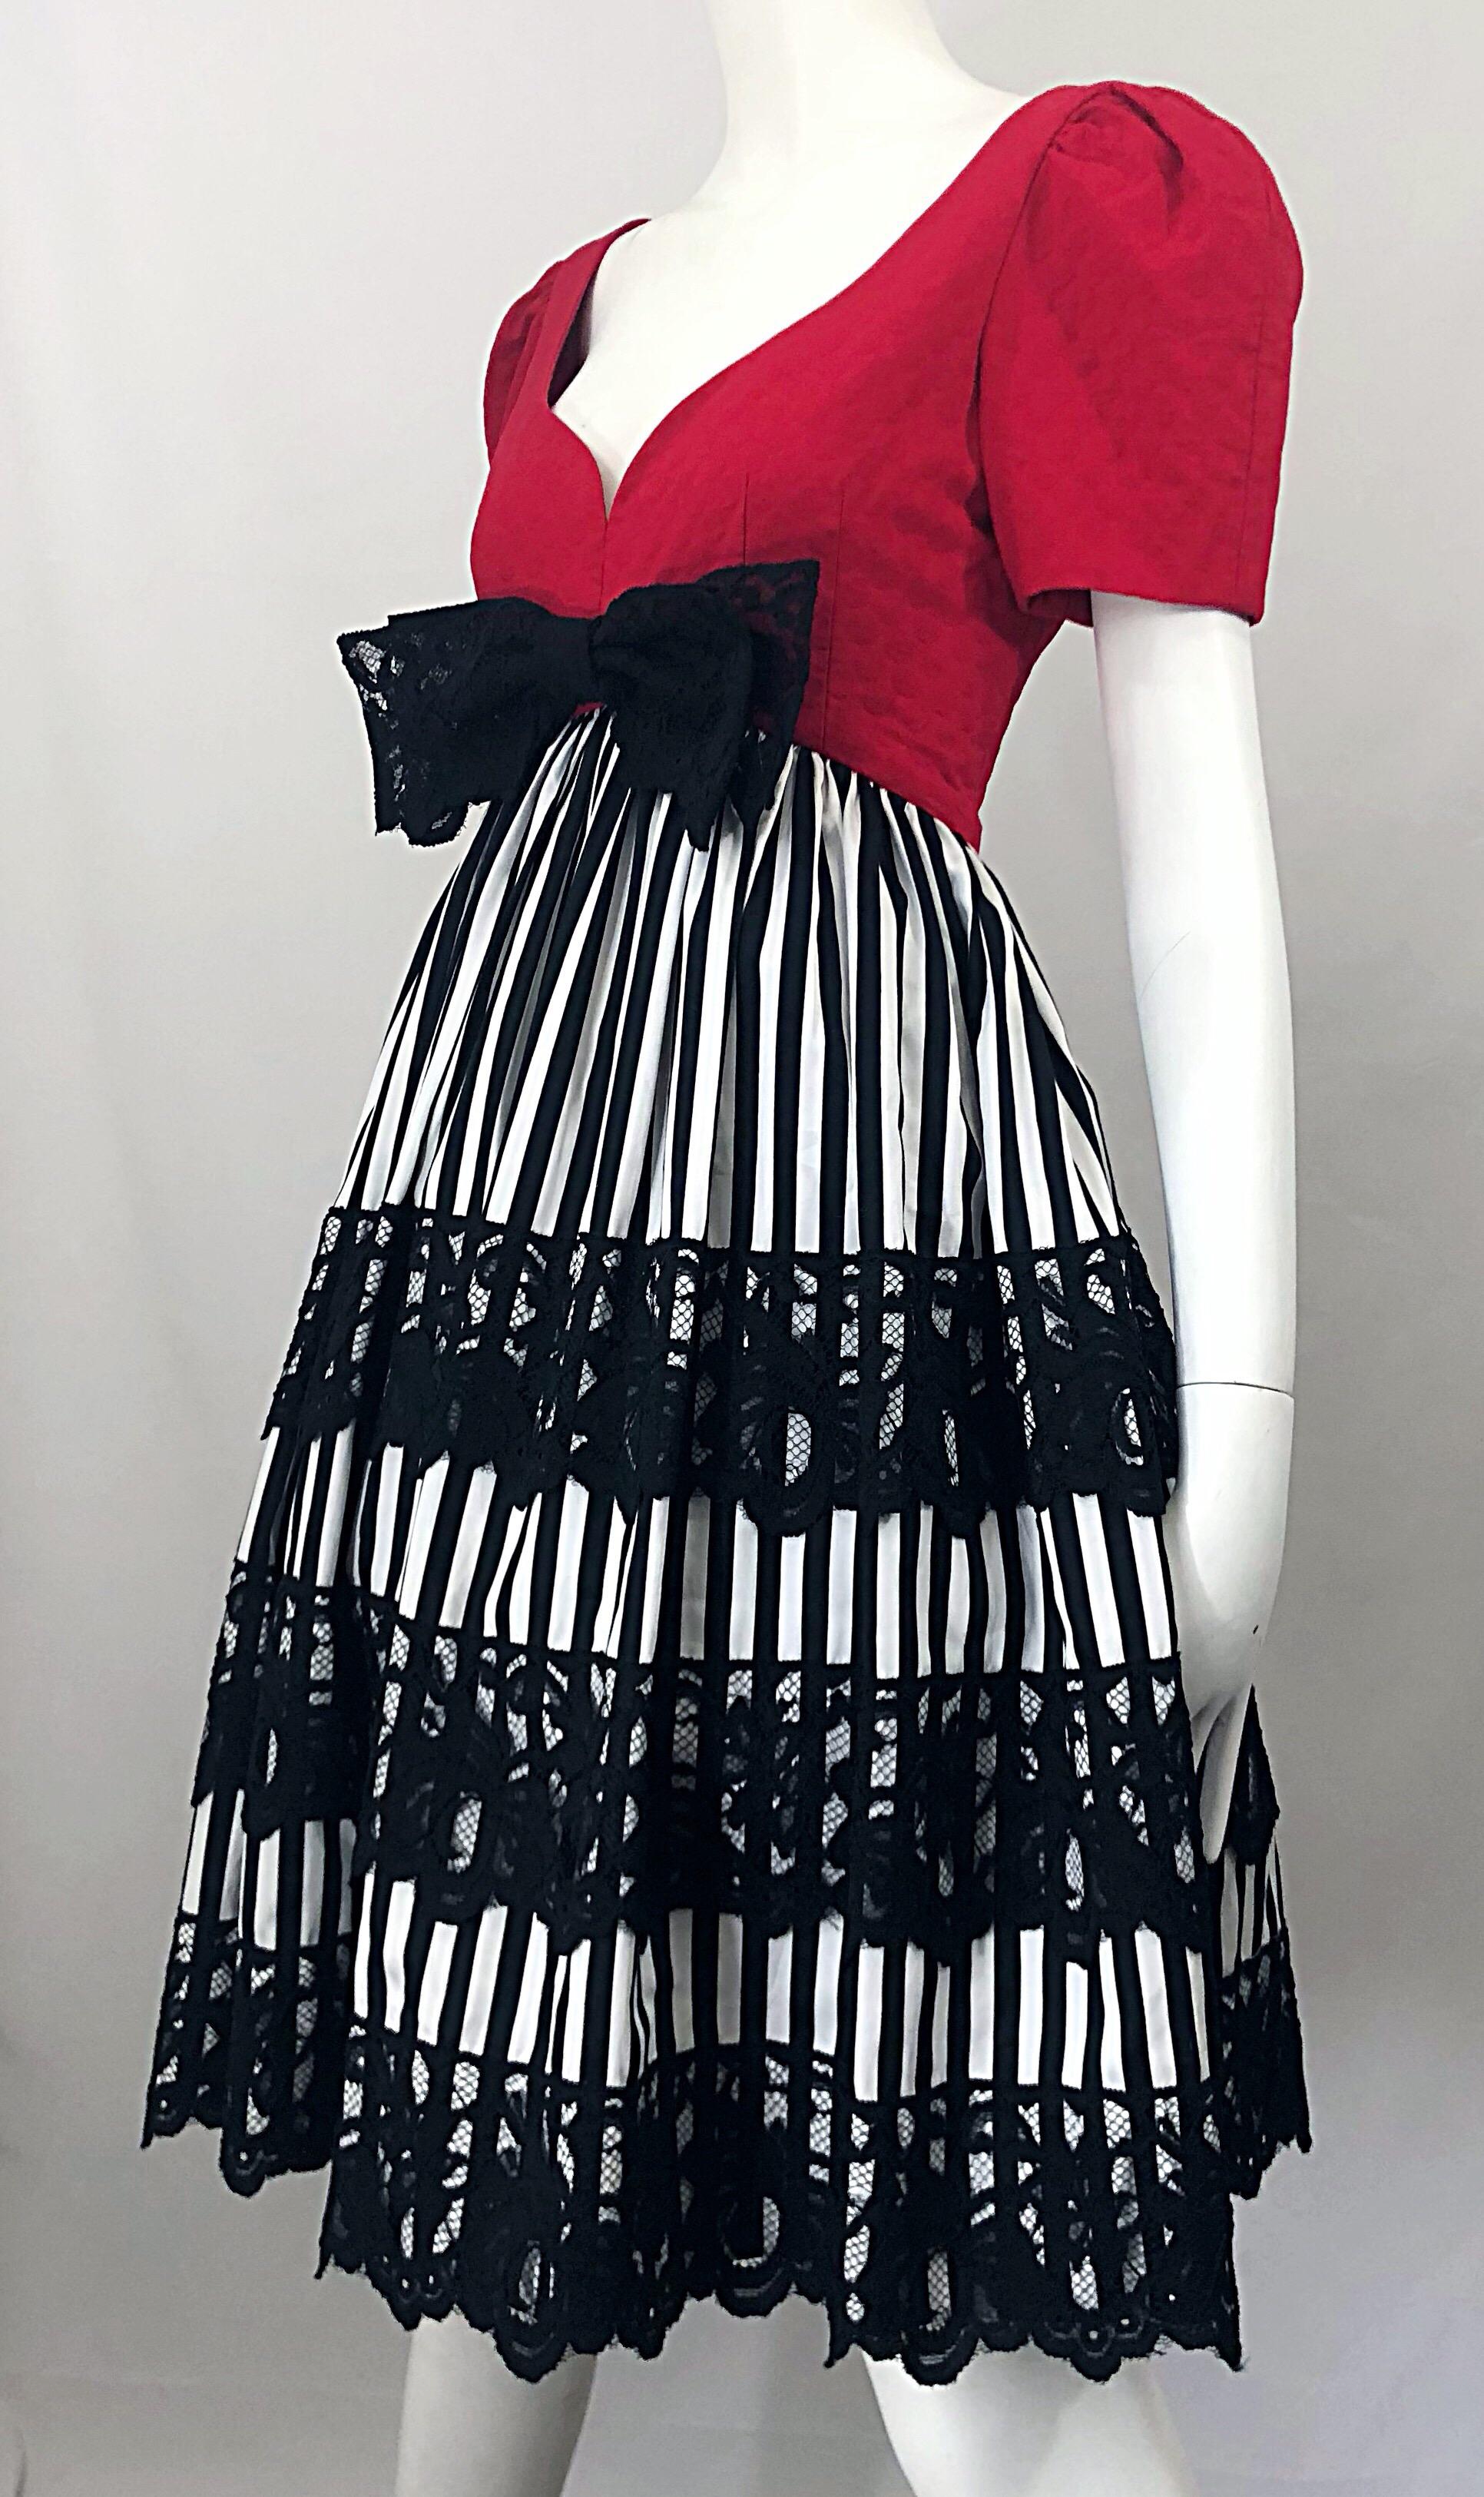 Vintage Adele Simpson 1980s Red Black White Fit n' Flare Empire Bow Lace Dress 6